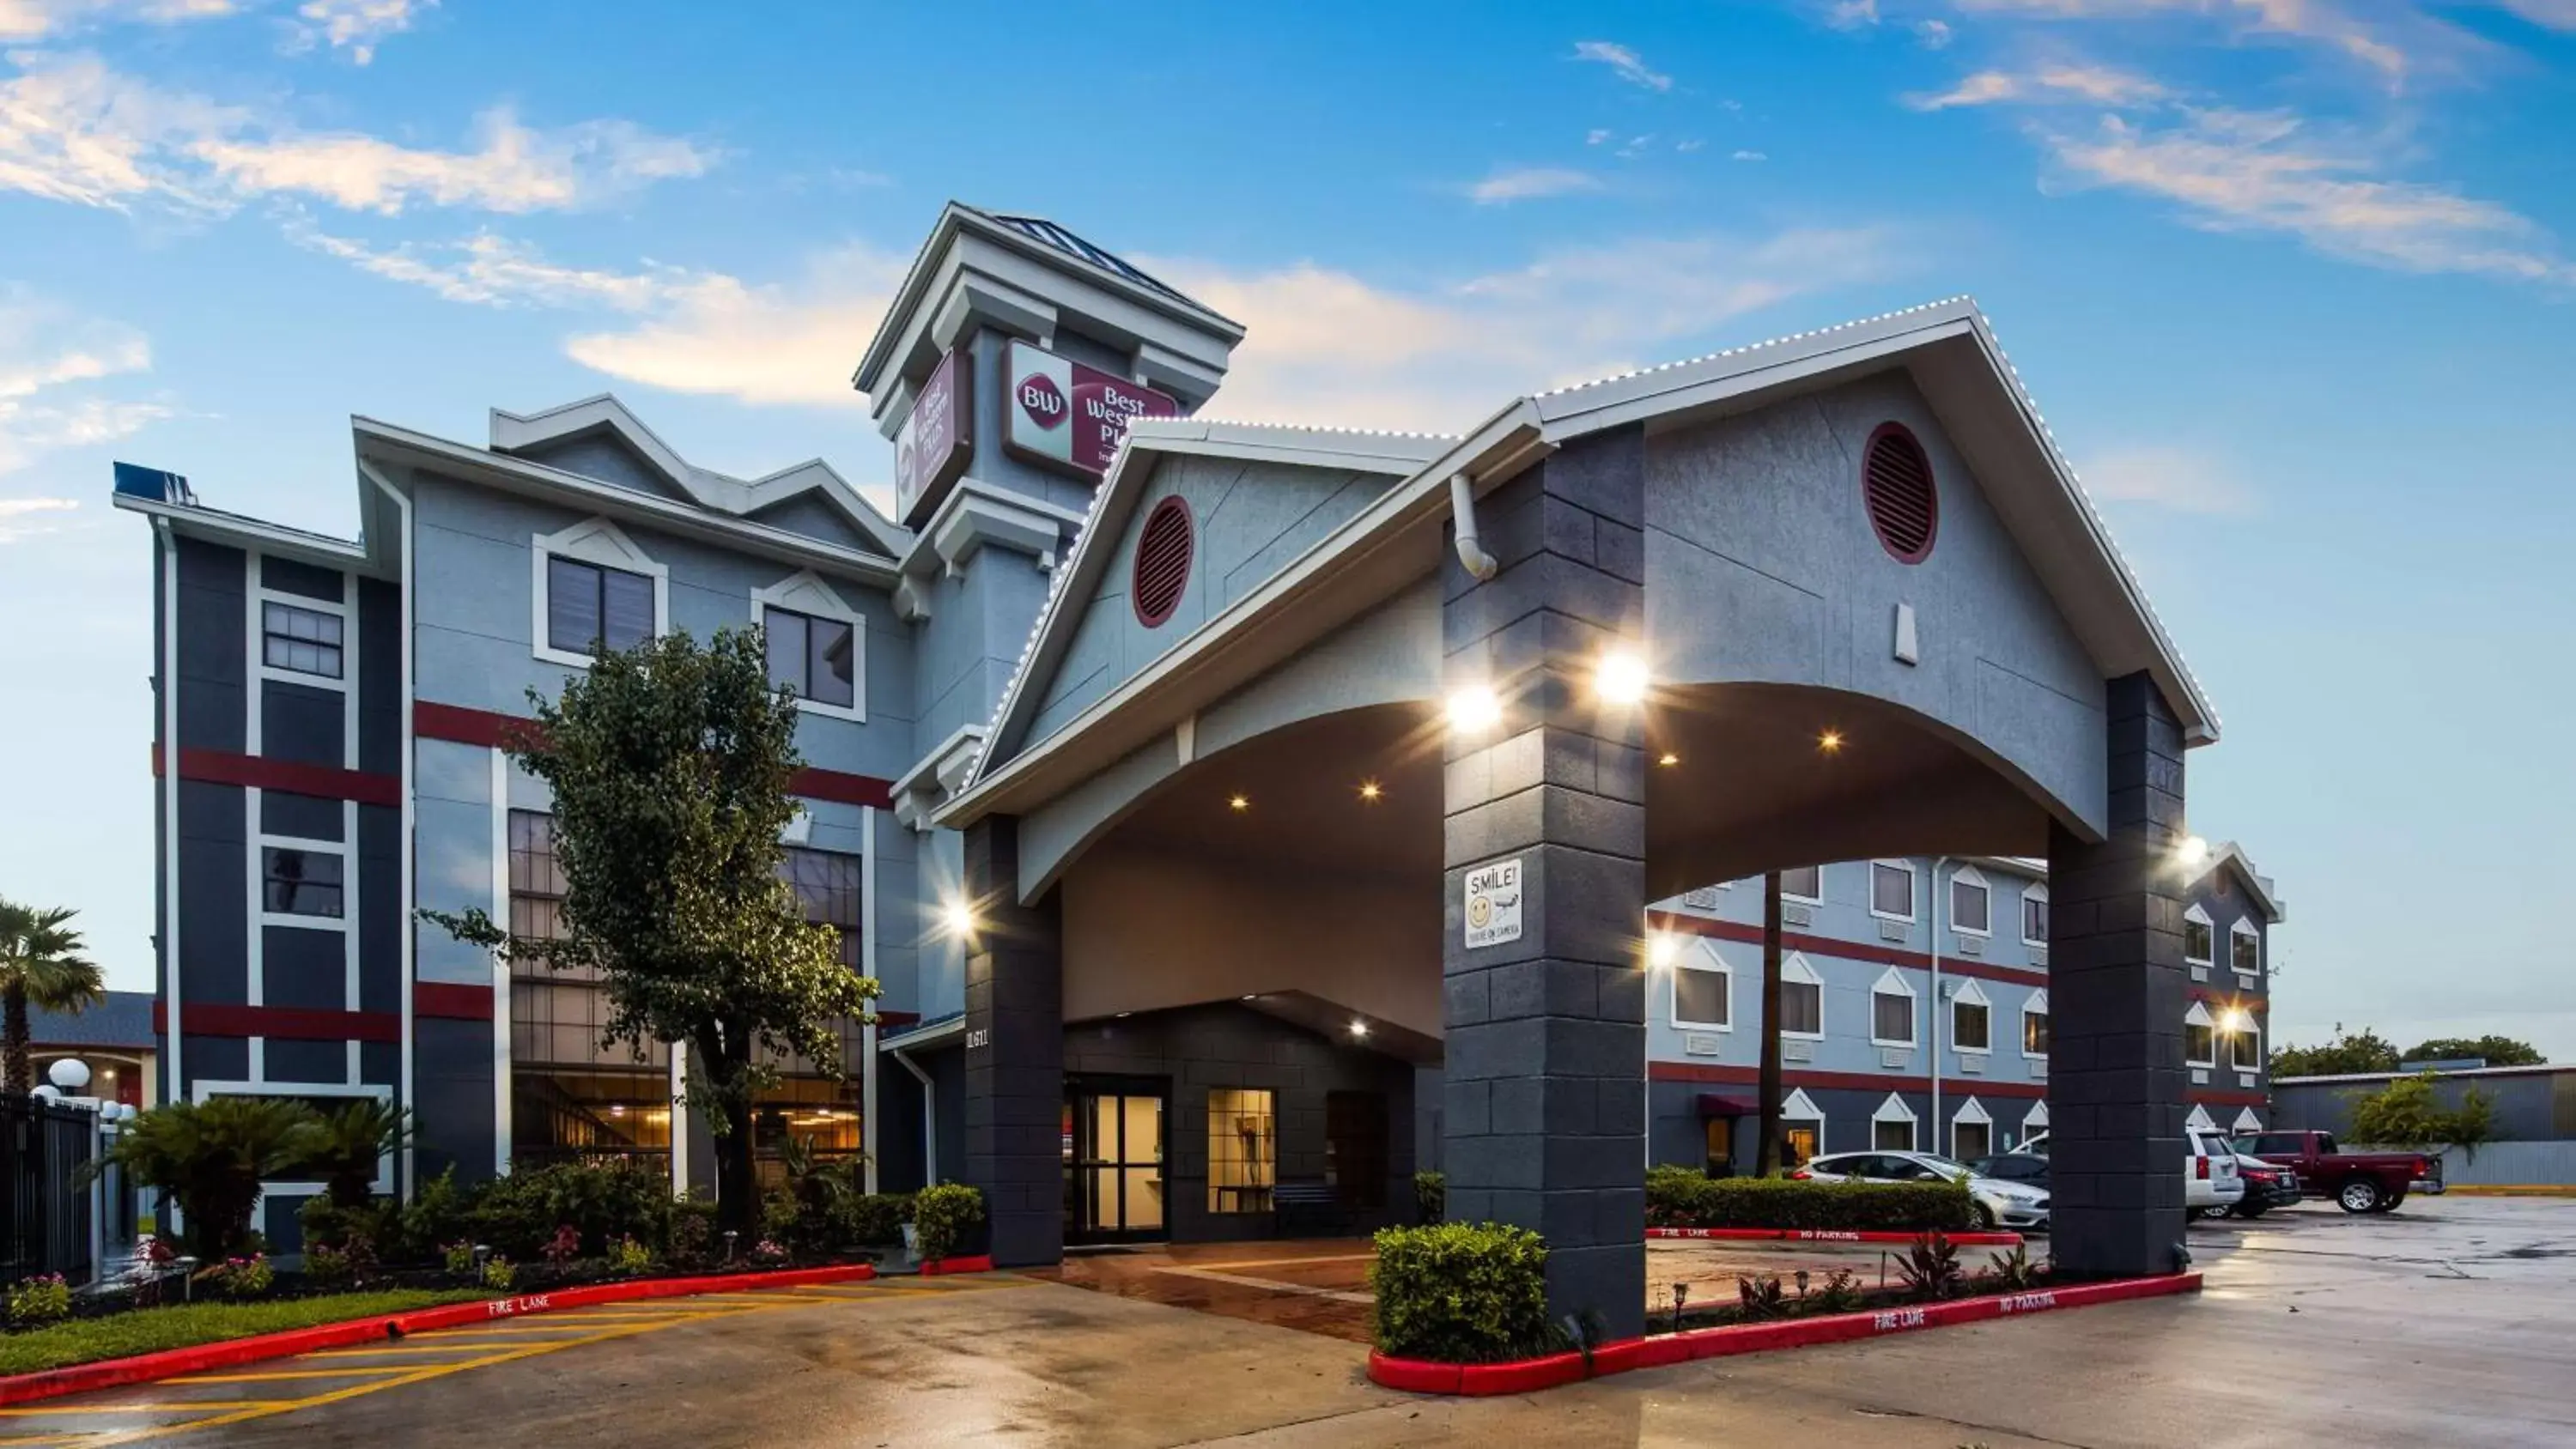 Property Building in Best Western Plus Northwest Inn and Suites Houston